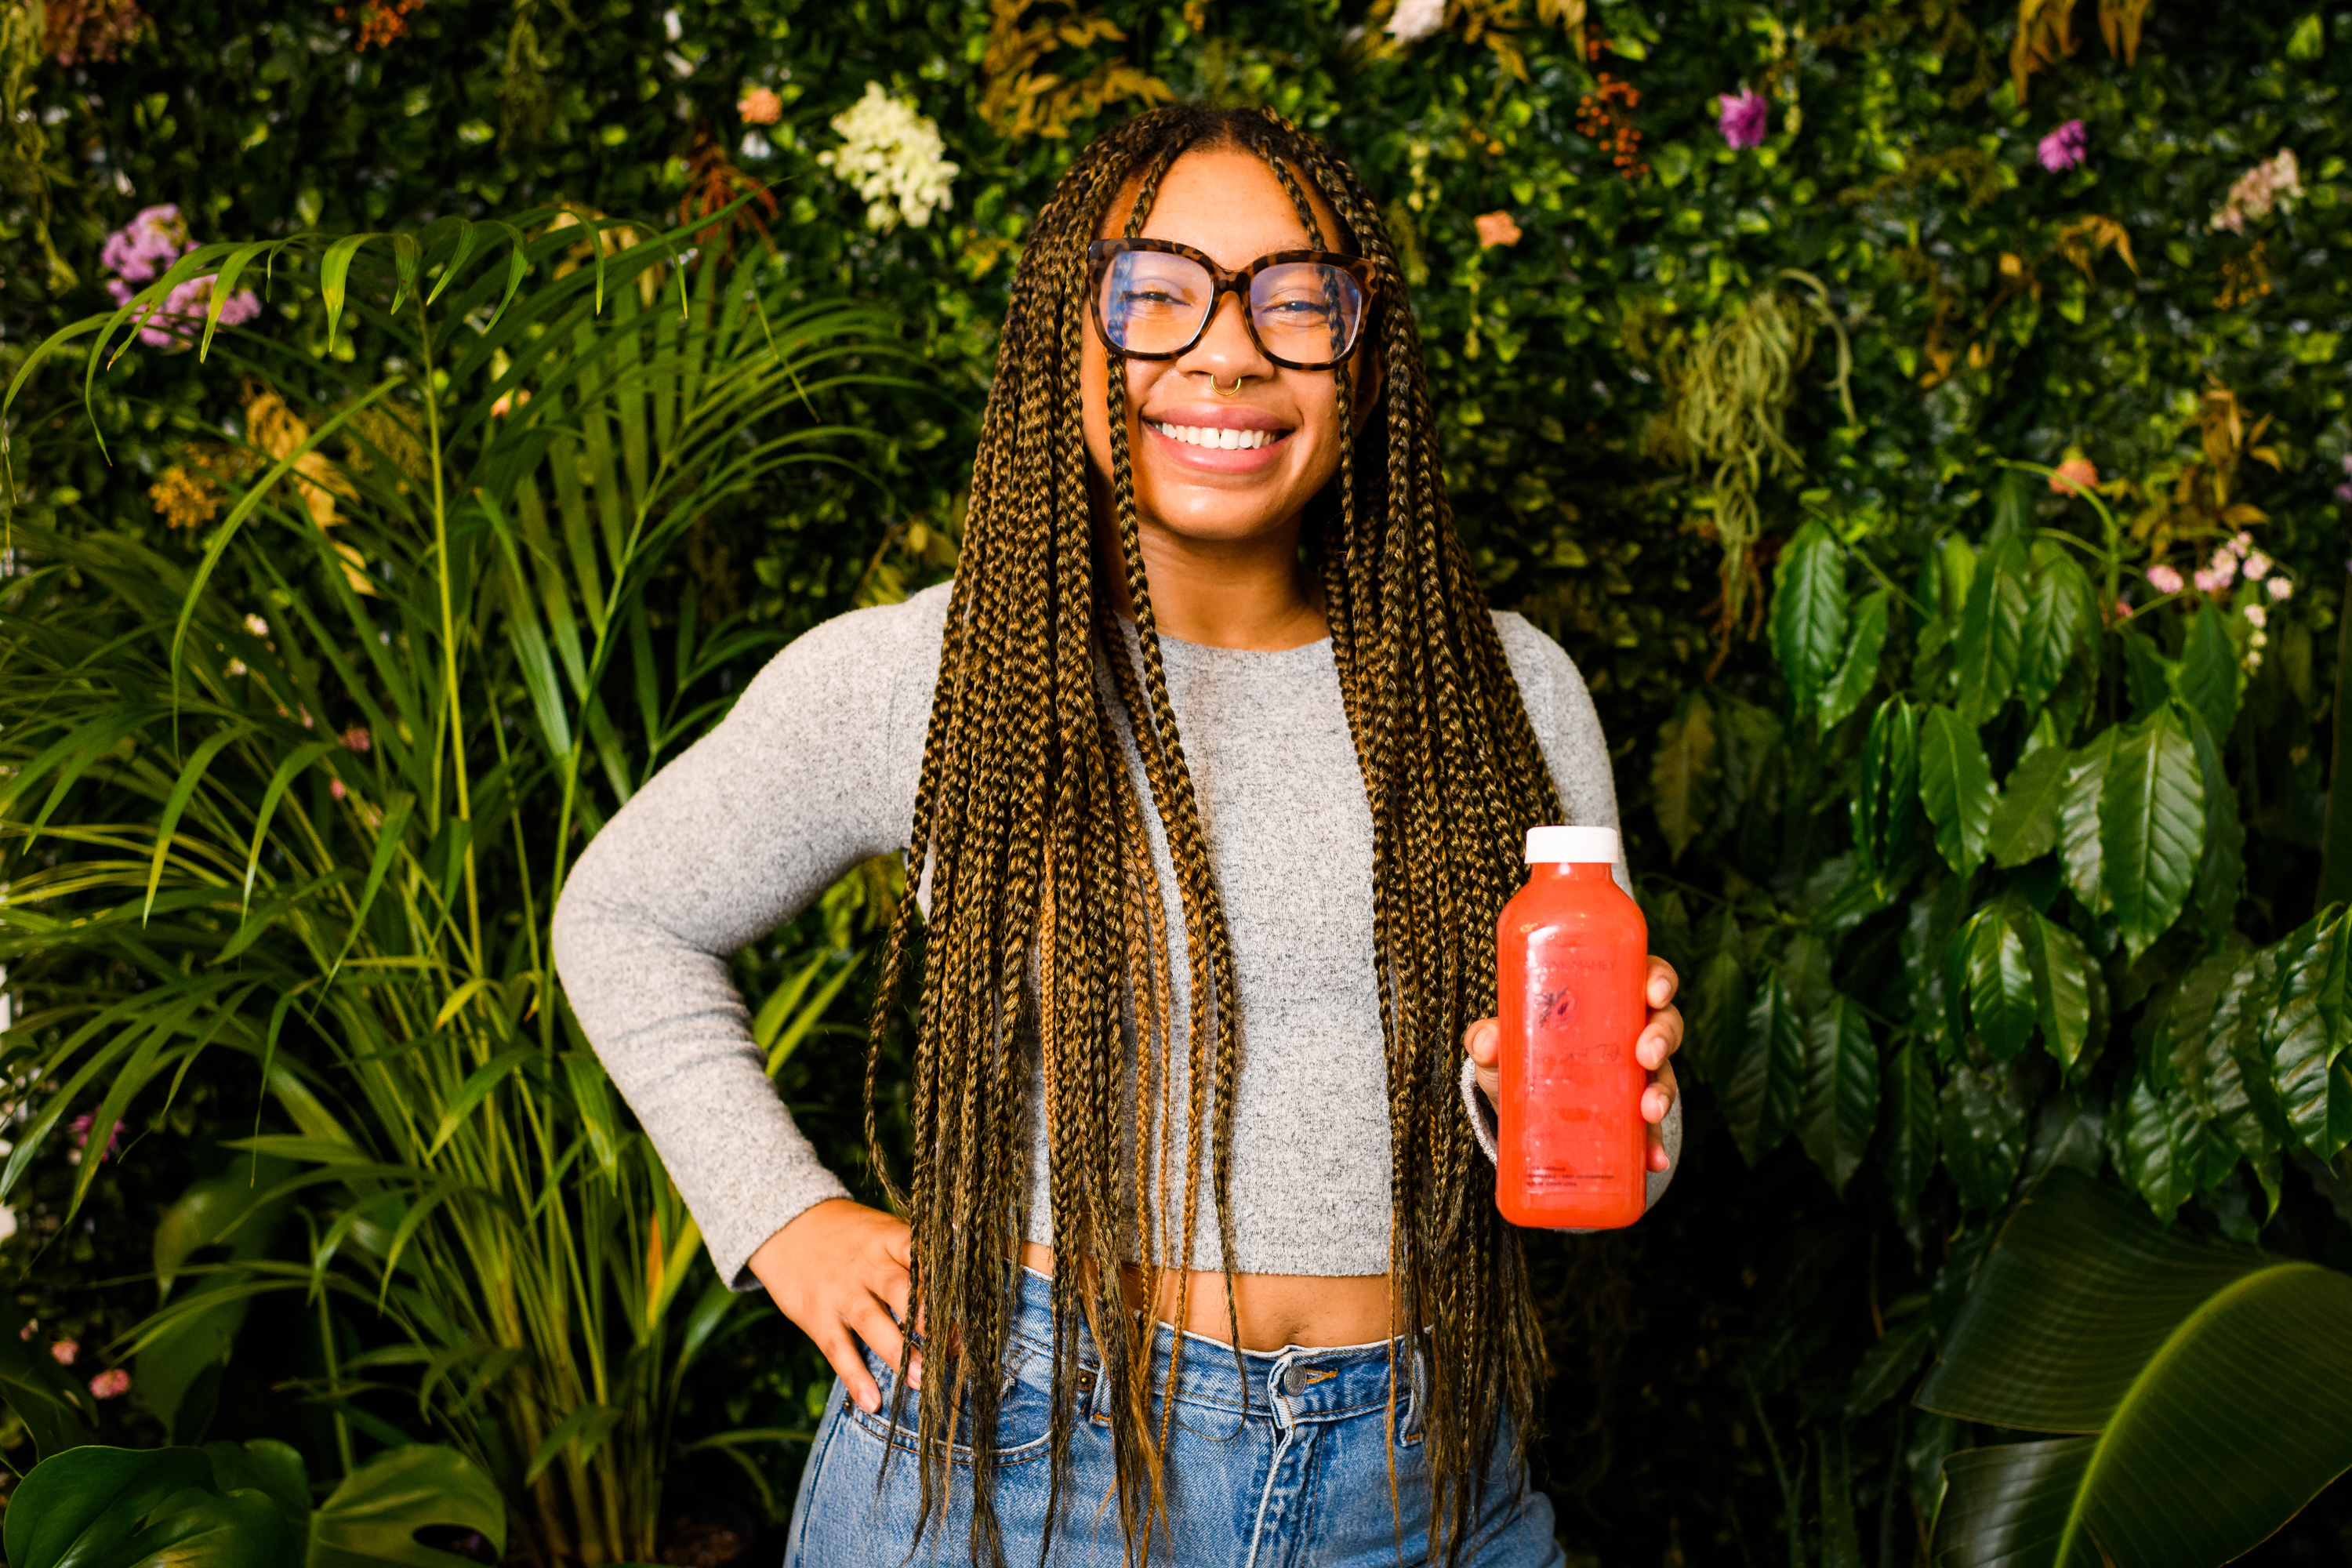 A woman with long dreads, glasses, and high-waisted jeans stands in front of a plant wall with a bottle of juice in her hand